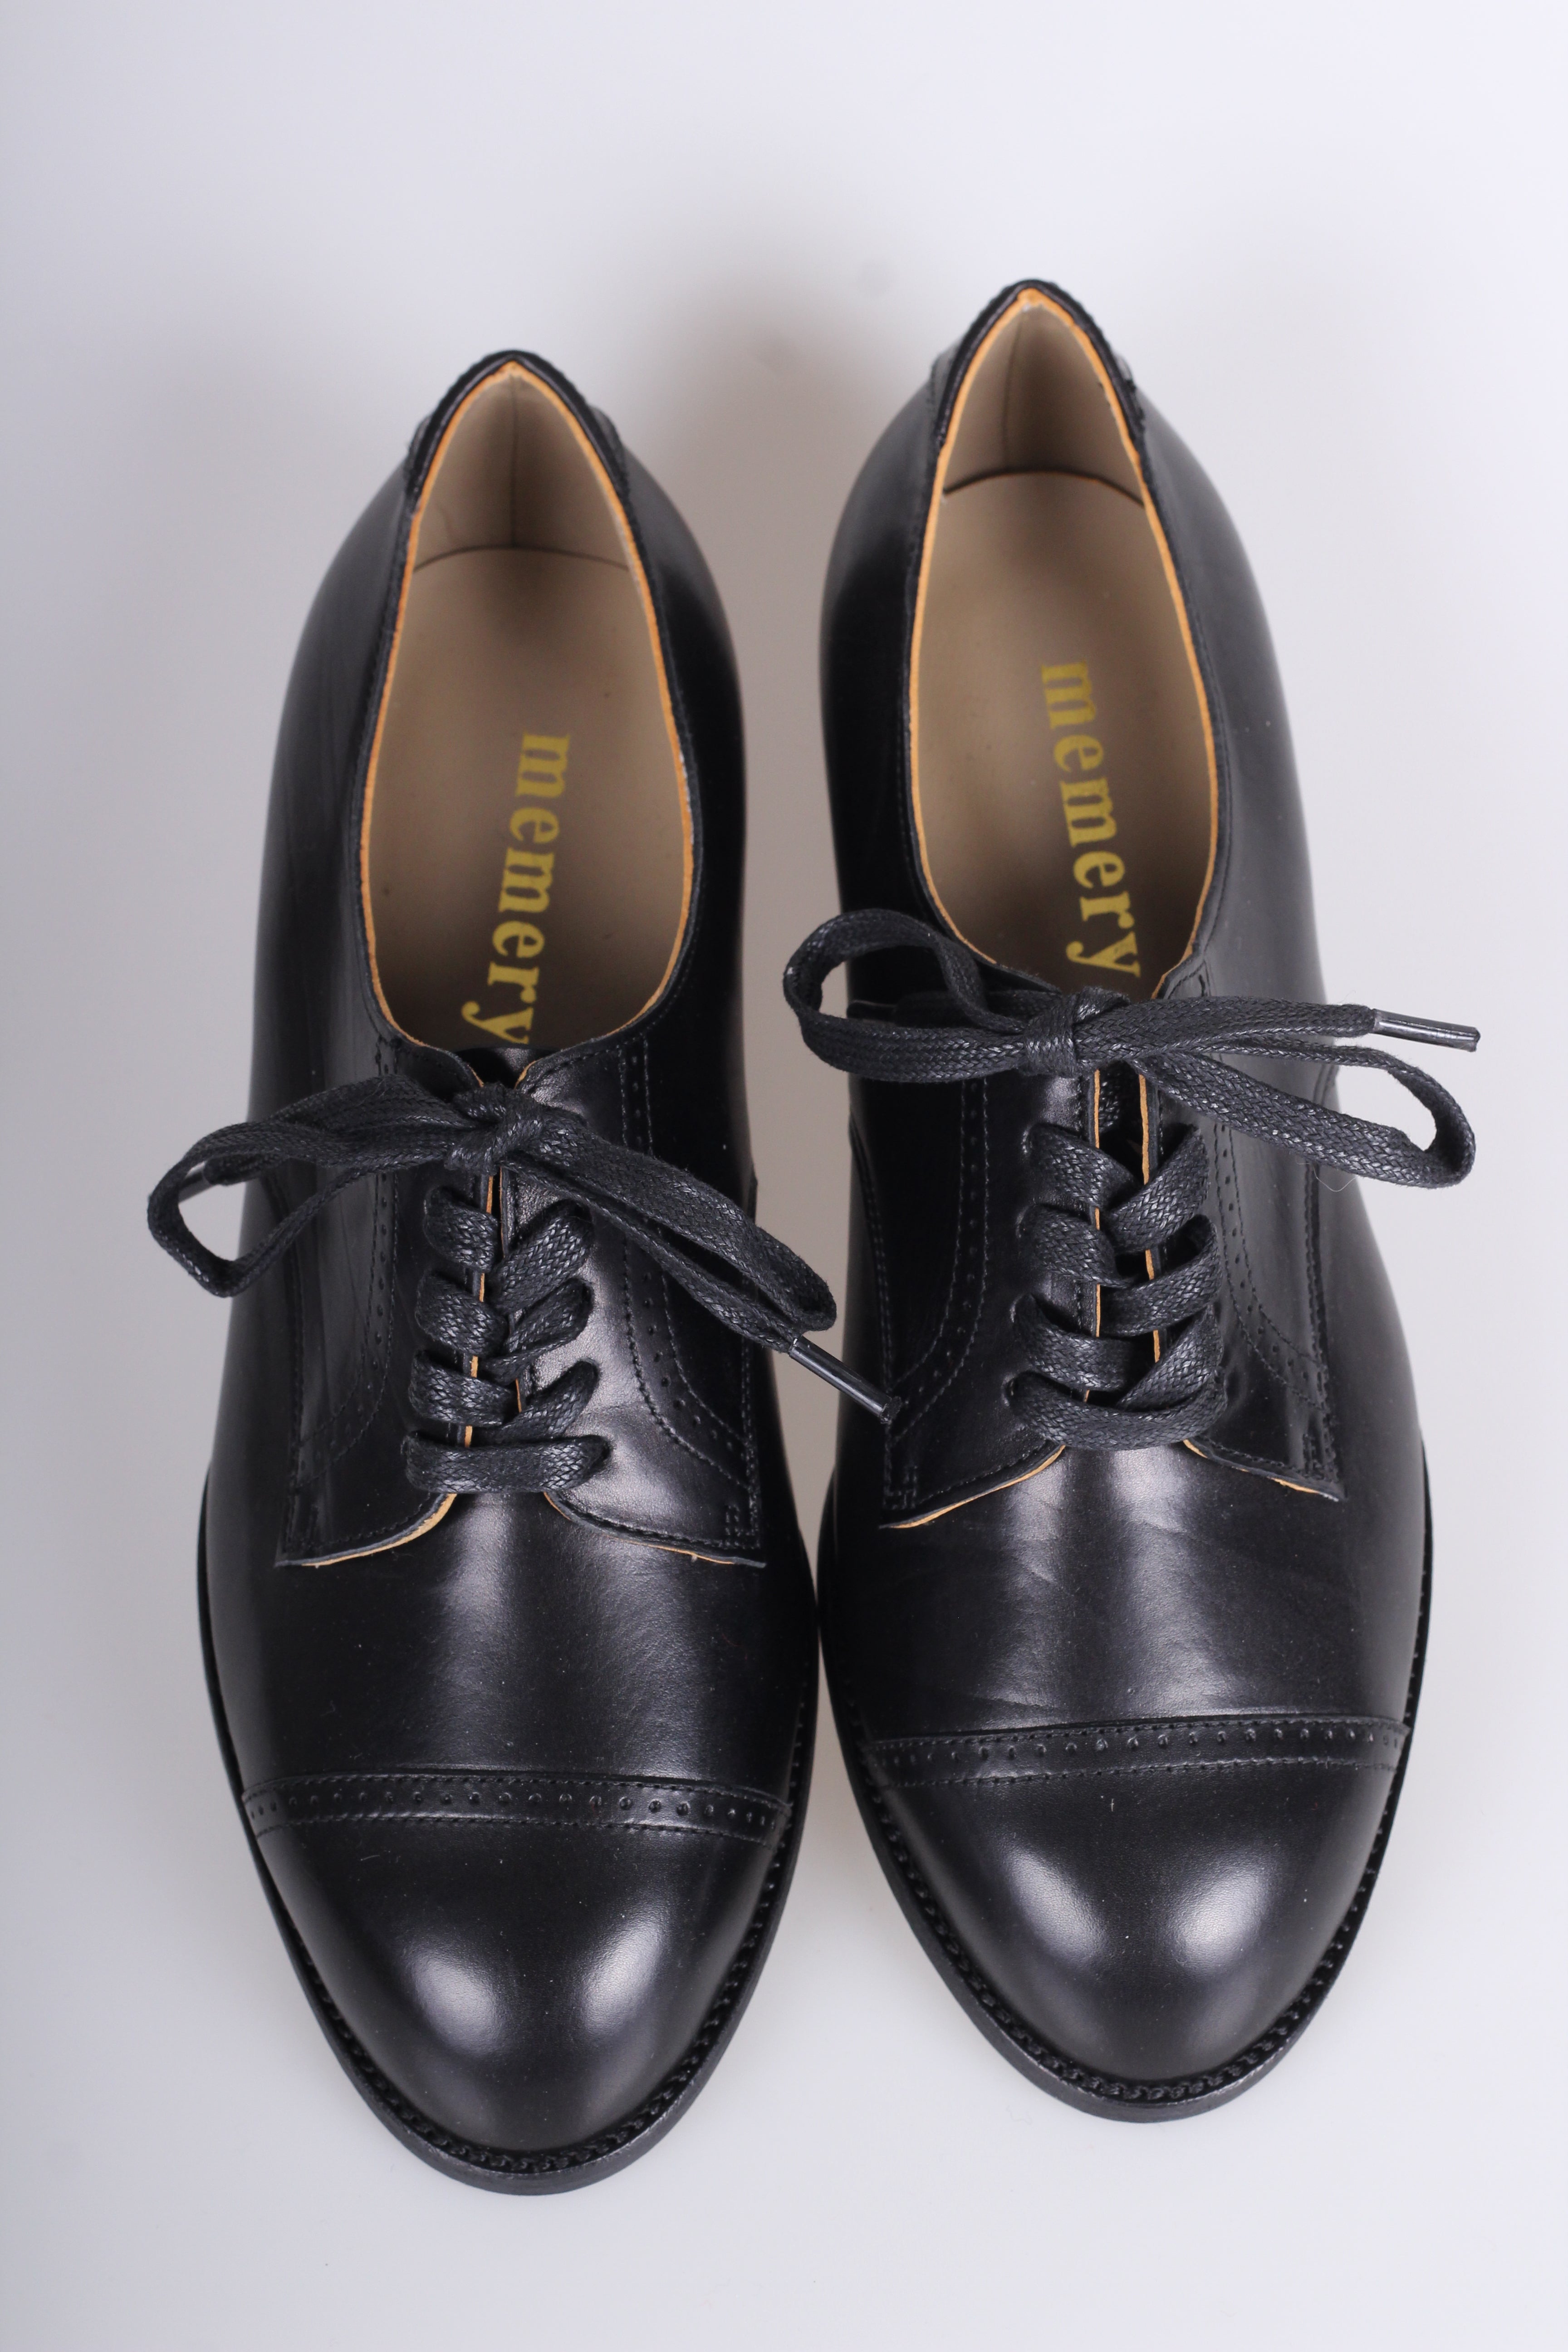 Everyday flat Oxford shoes - 40s - Black - Eleanor